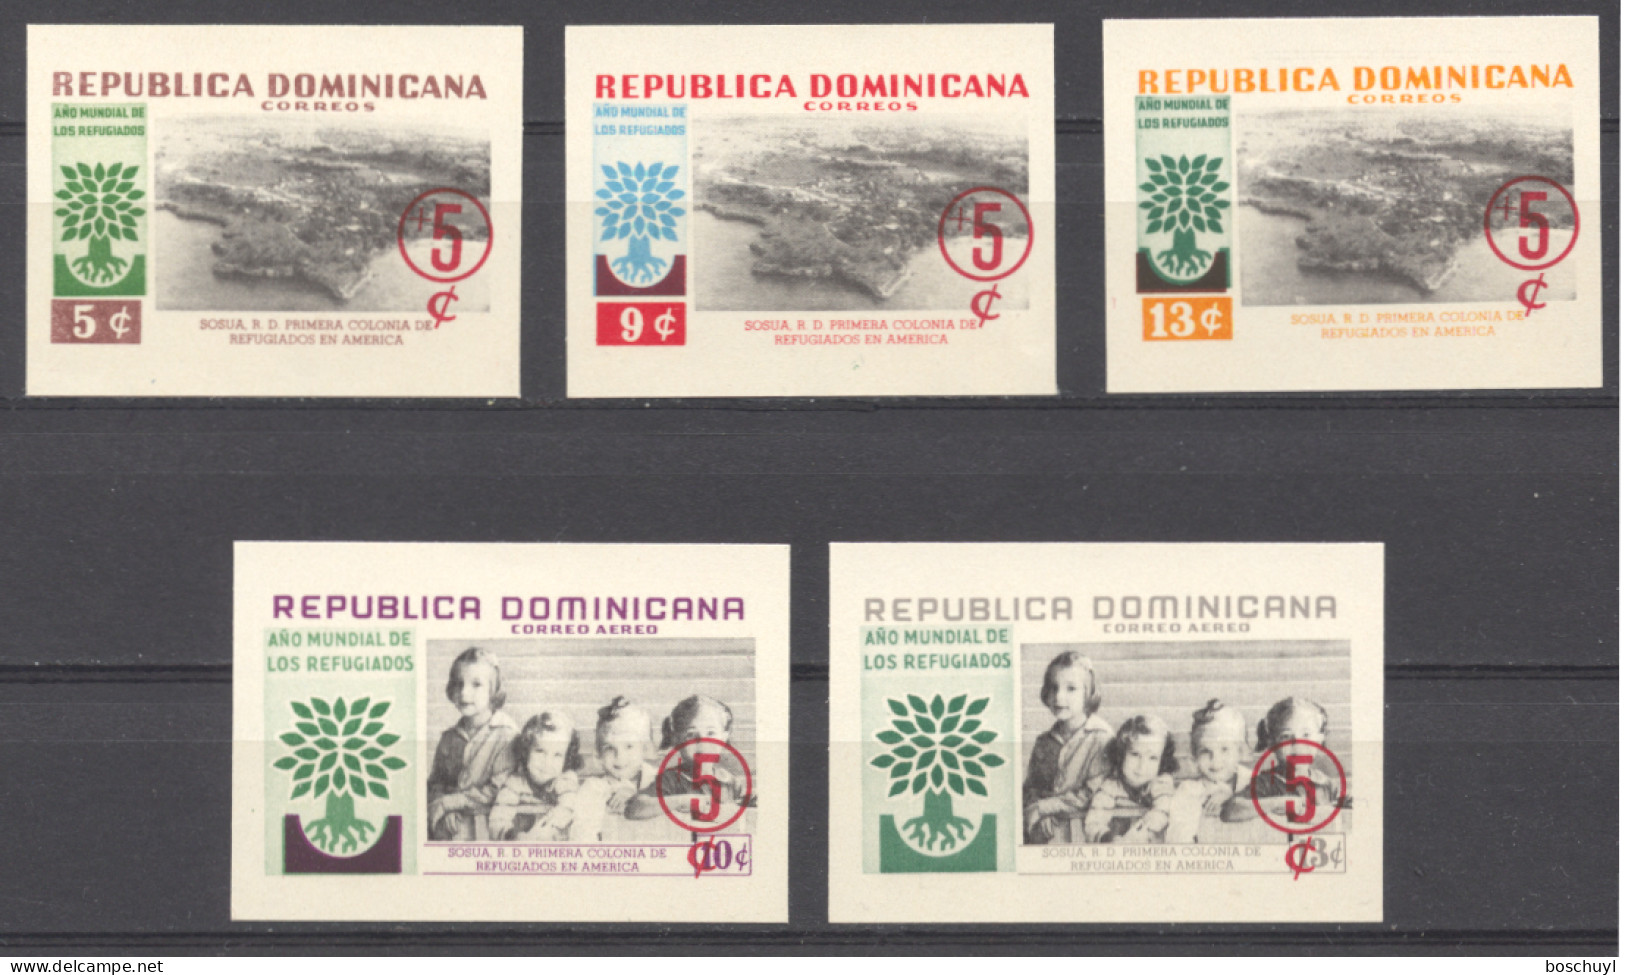 Dominican Republic, 1960, World Refugee Year, WRY, United Nations, Overprinted, Imperforated, MNH, Michel 717-721B - Flüchtlinge